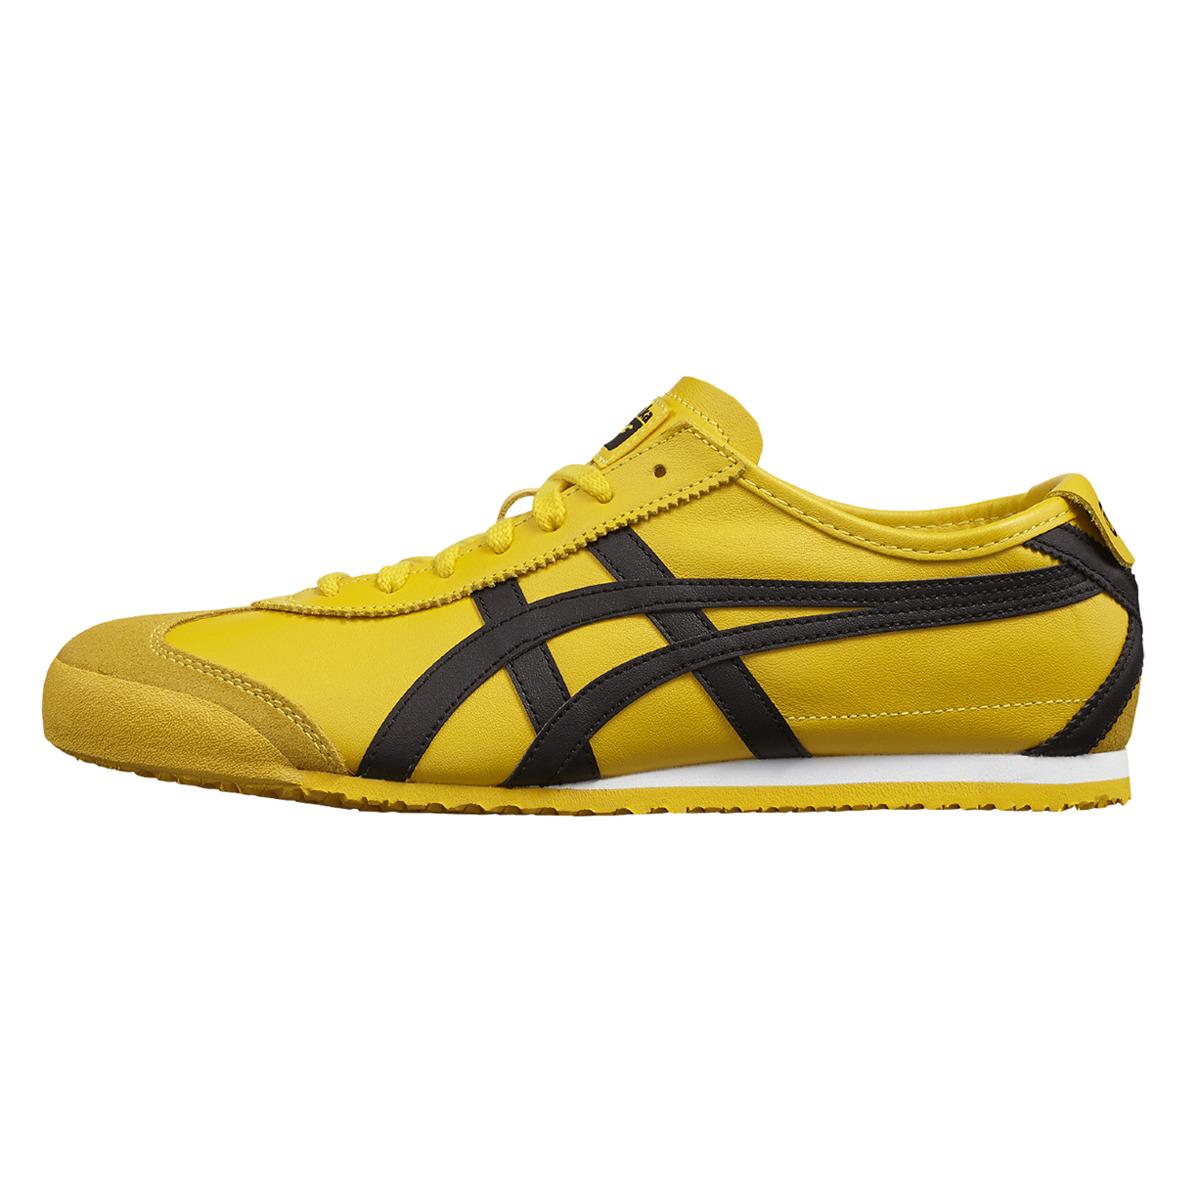 Onitsuka Tiger Leather Mexico 66 Casual Trainers in Yellow - Lyst